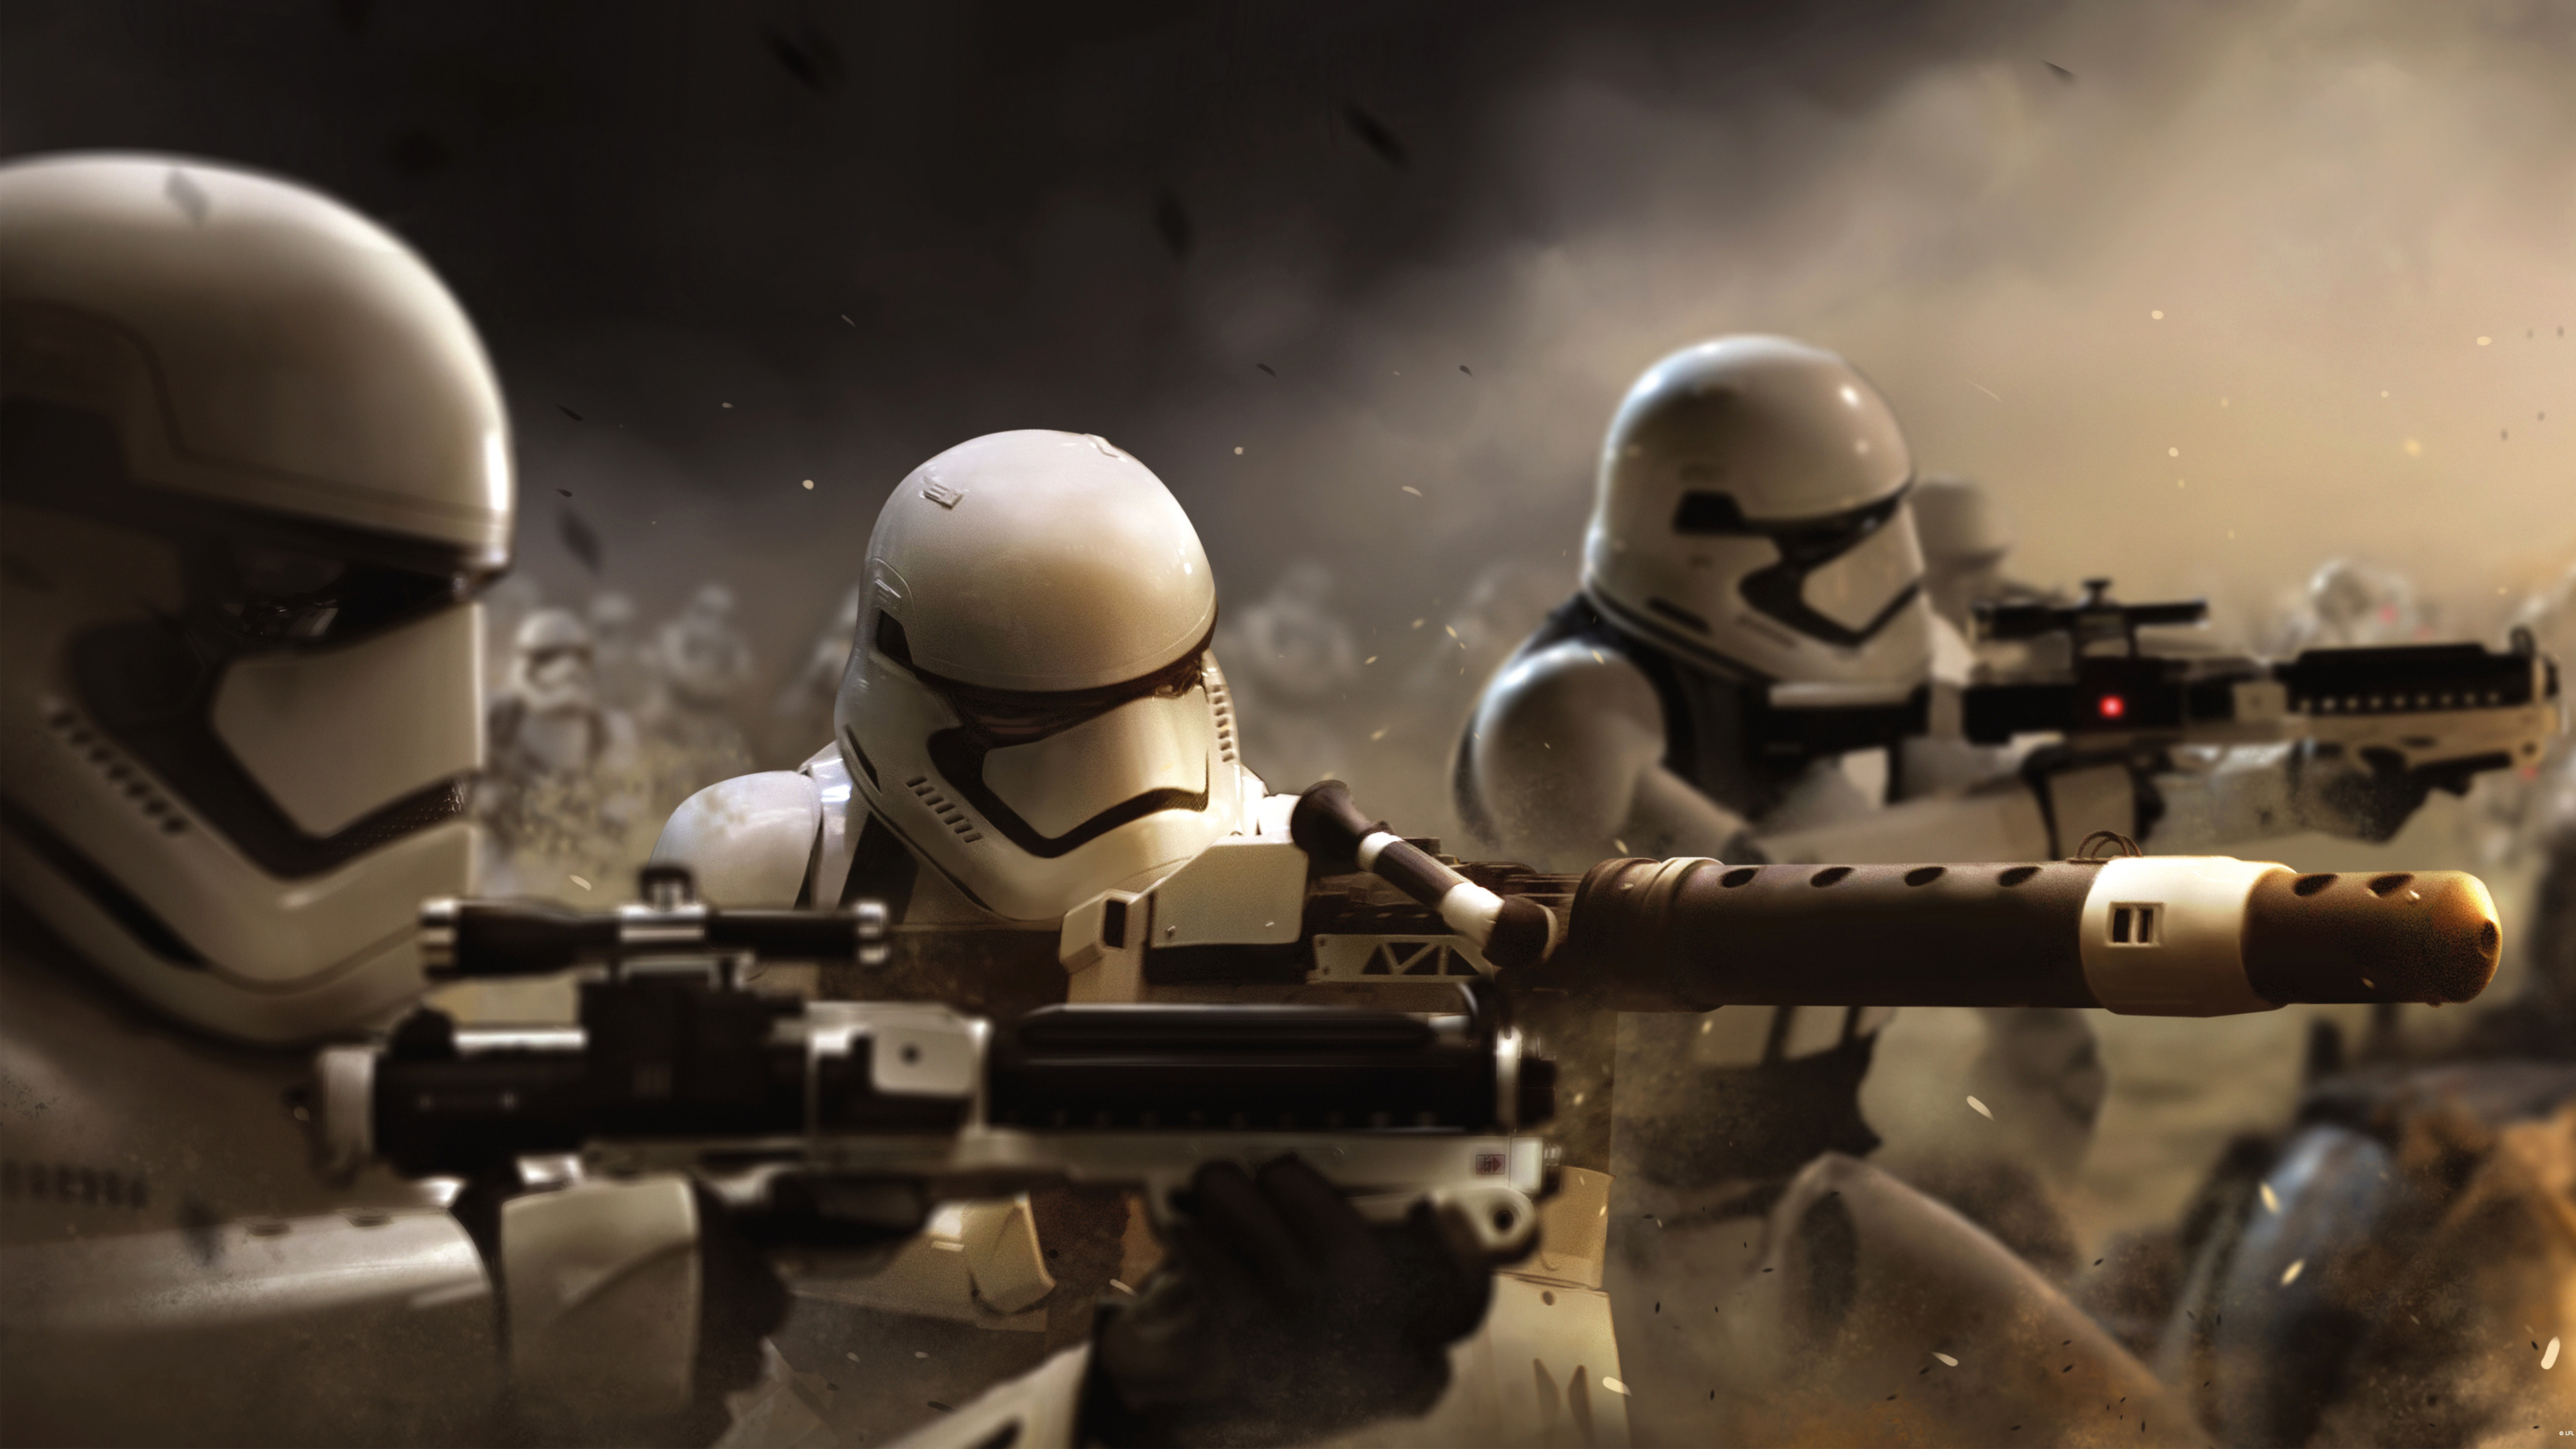 3840x2160 Stormtroopers Wallpapers | HD Wallpapers